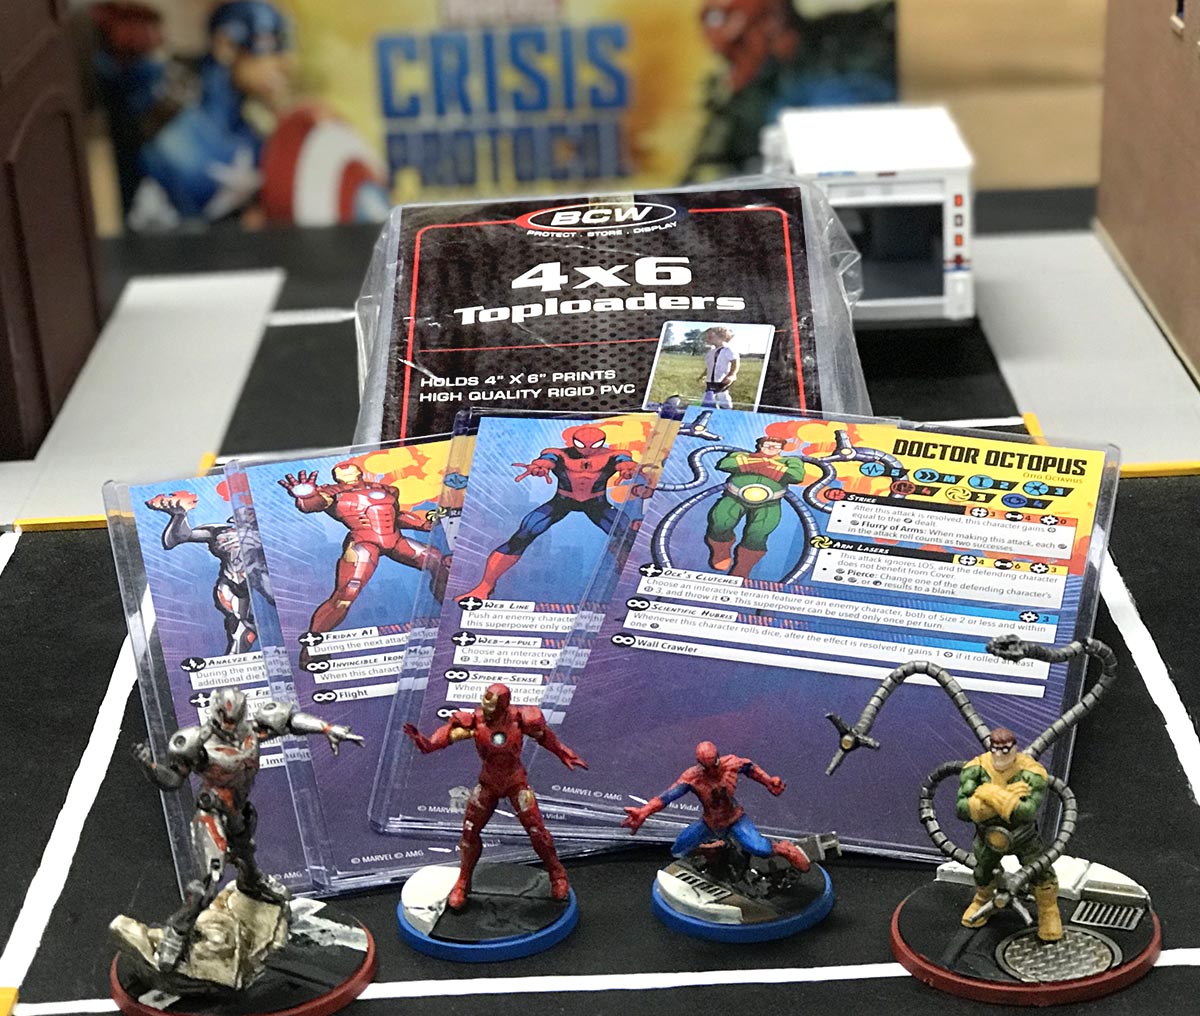 Marvel Crisis Protocol minis, cards, and BCW 4x6 toploaders